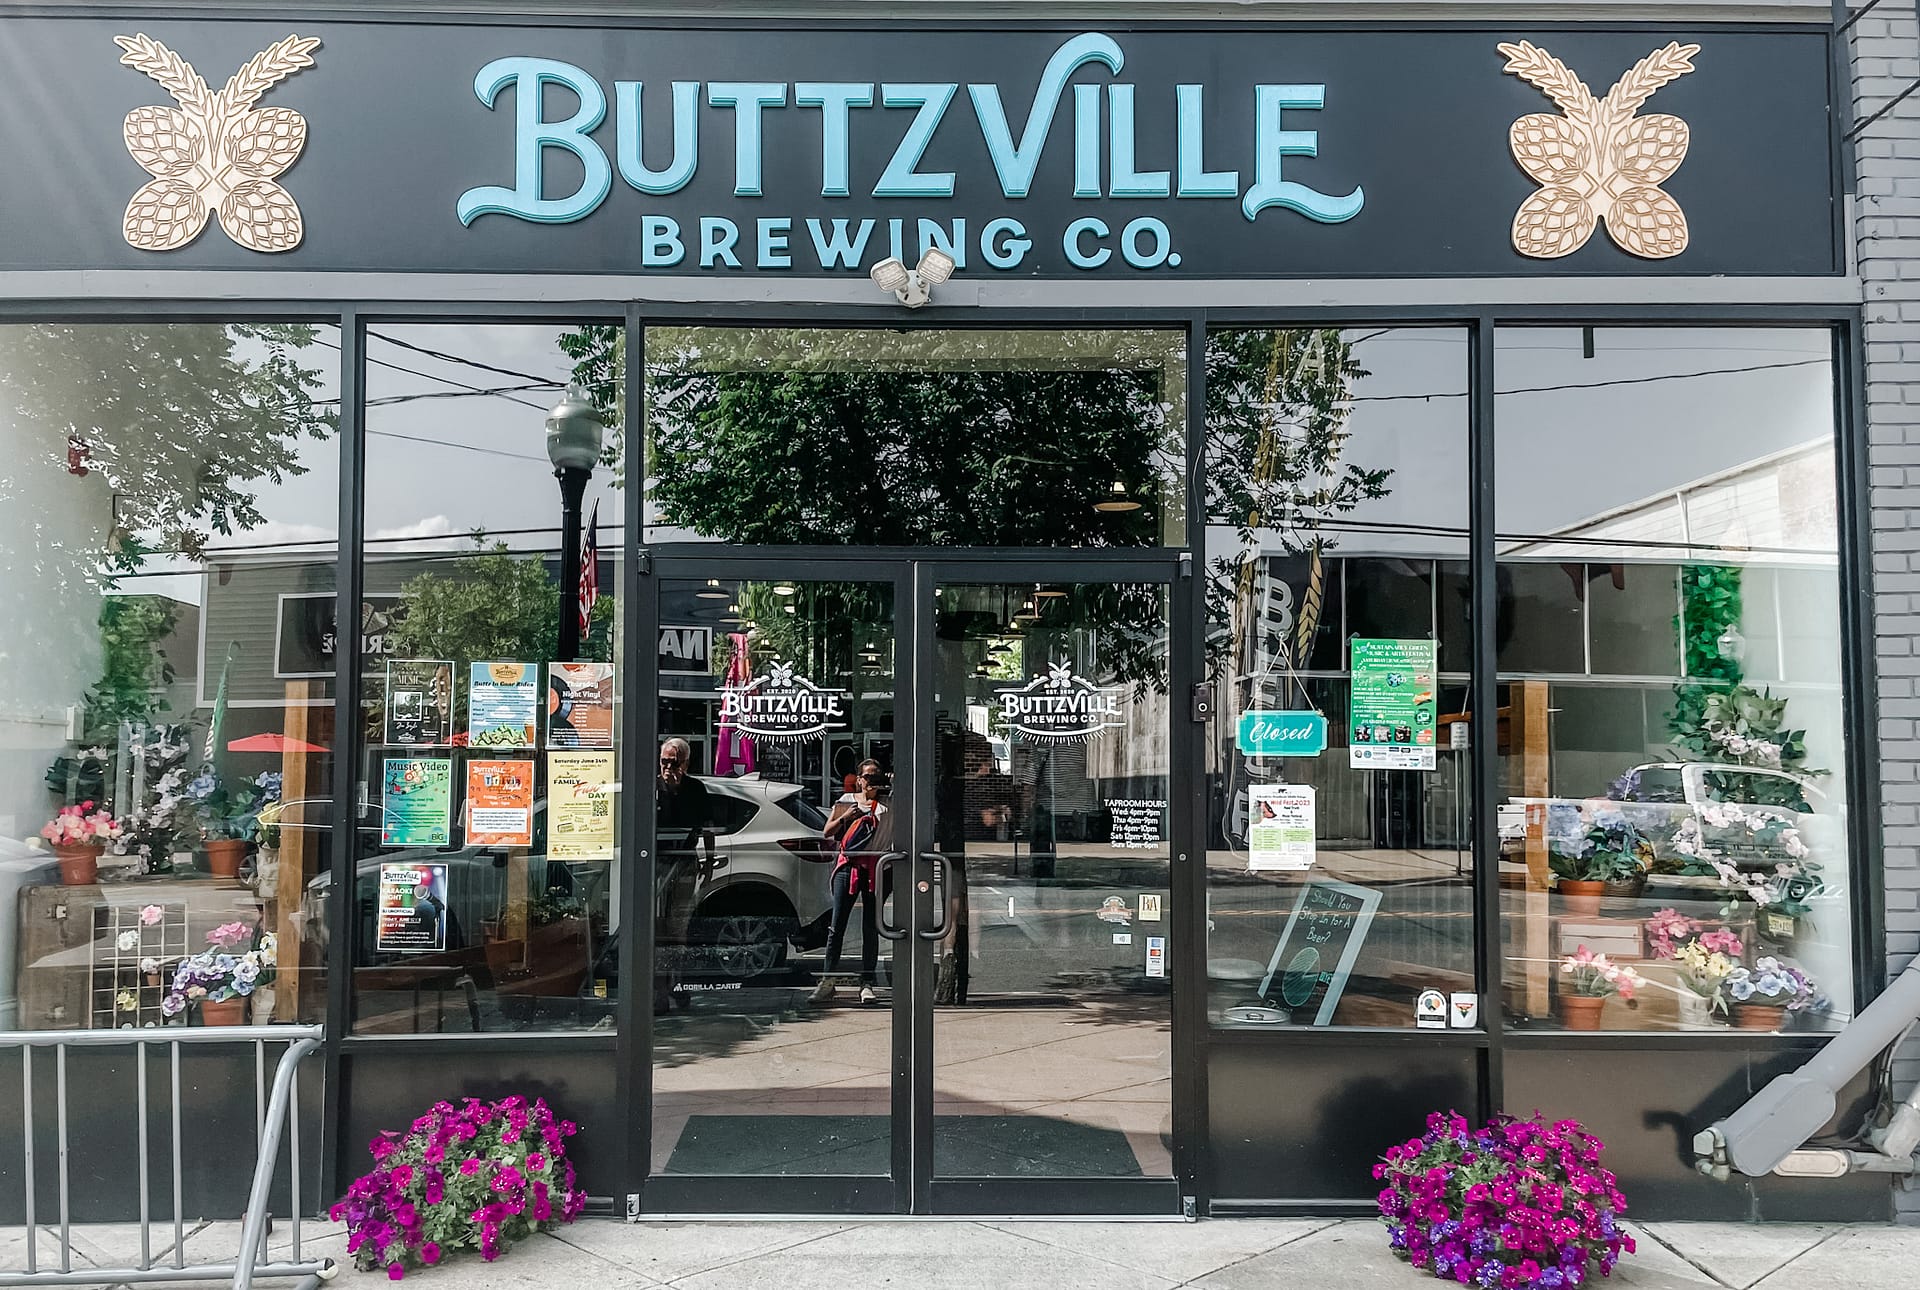 Exterior of brewery with sign reading Buttzville Brewing Co.